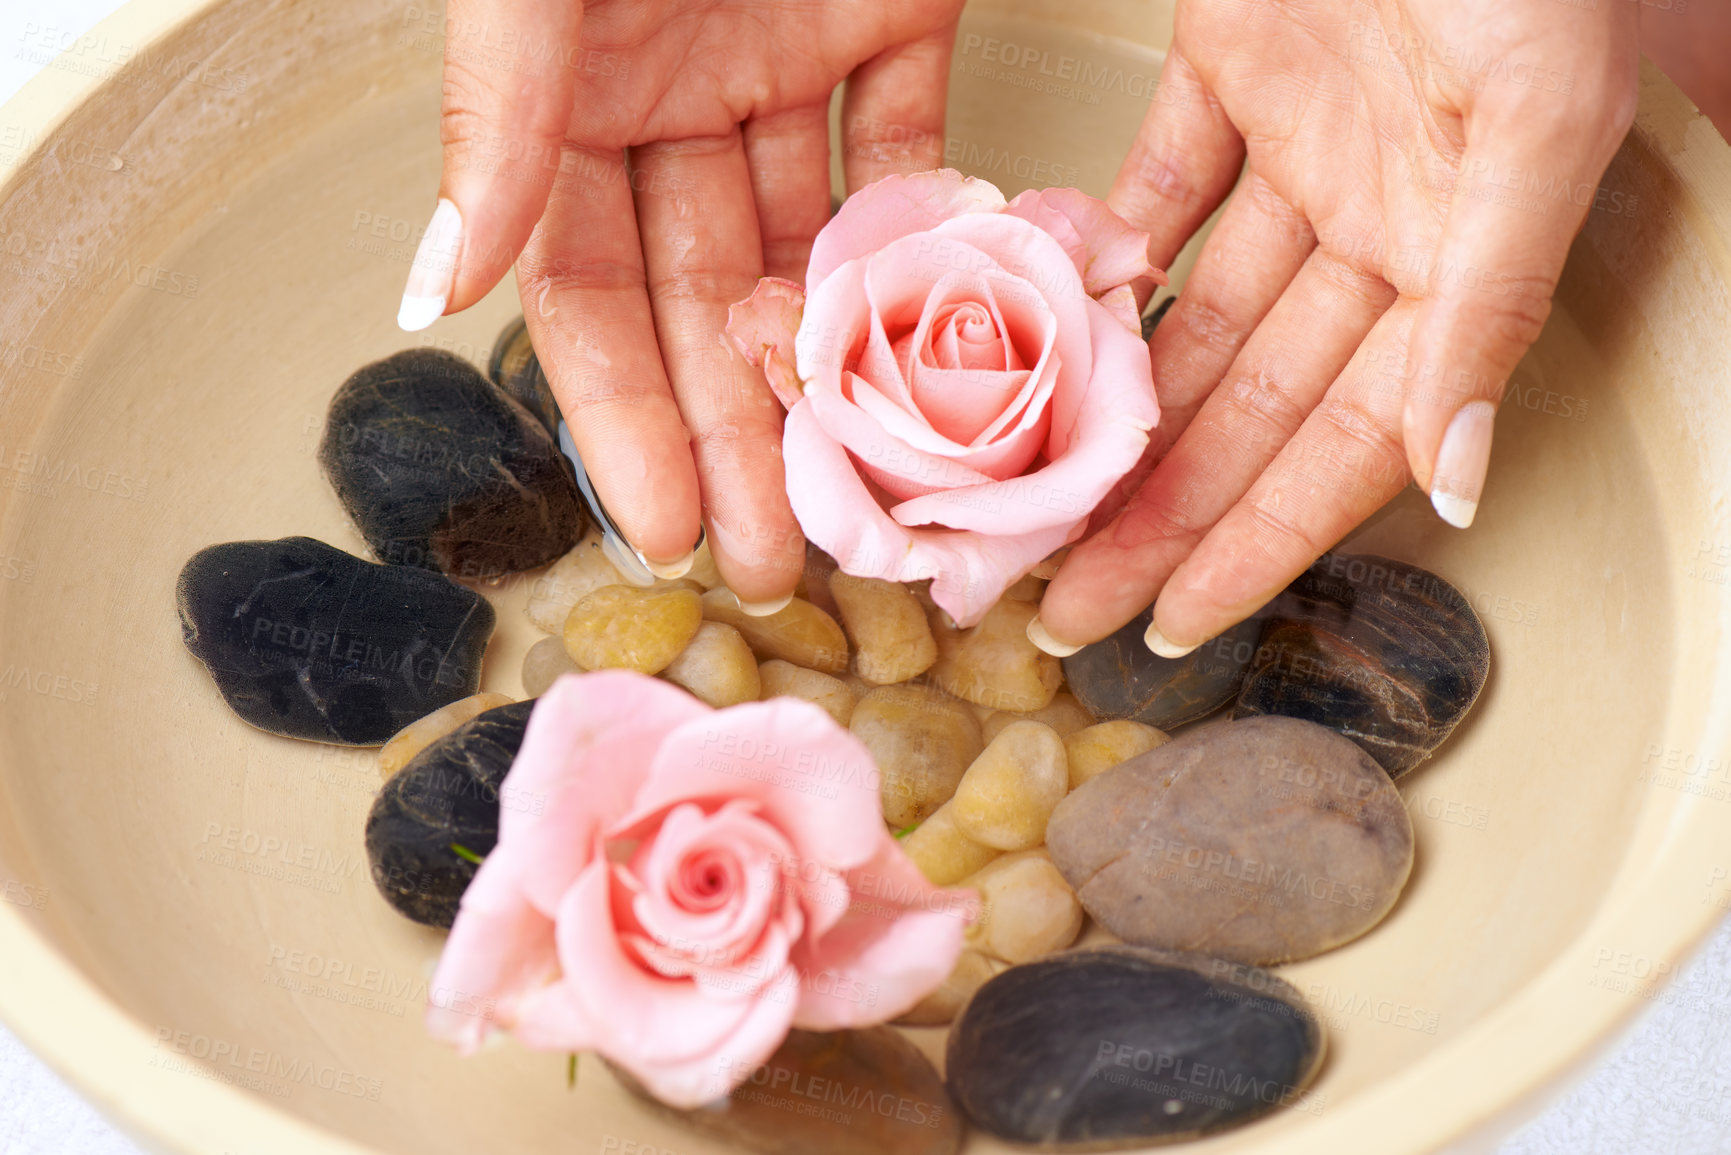 Buy stock photo Flowers, skincare and hands of woman in water bowl for cleaning or hygiene. Floral therapy, spa treatment and female soak hand and washing with pink roses and stones for detox, beauty and manicure.